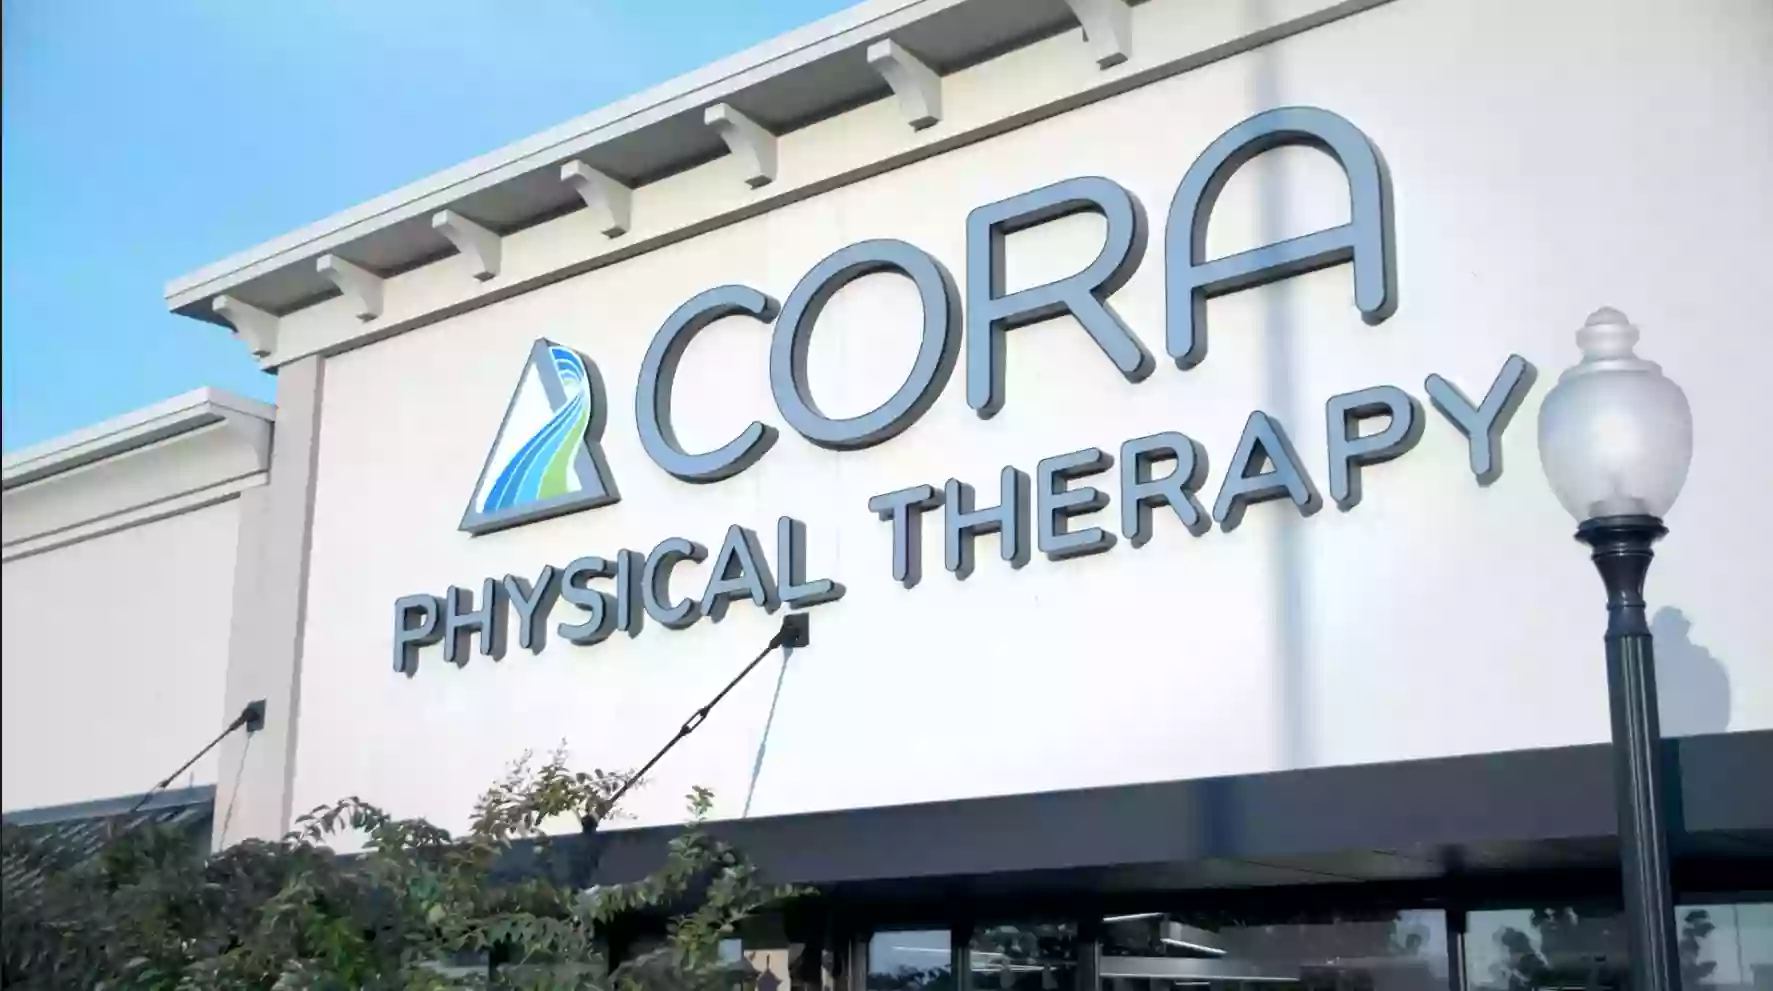 CORA Physical Therapy Hernando